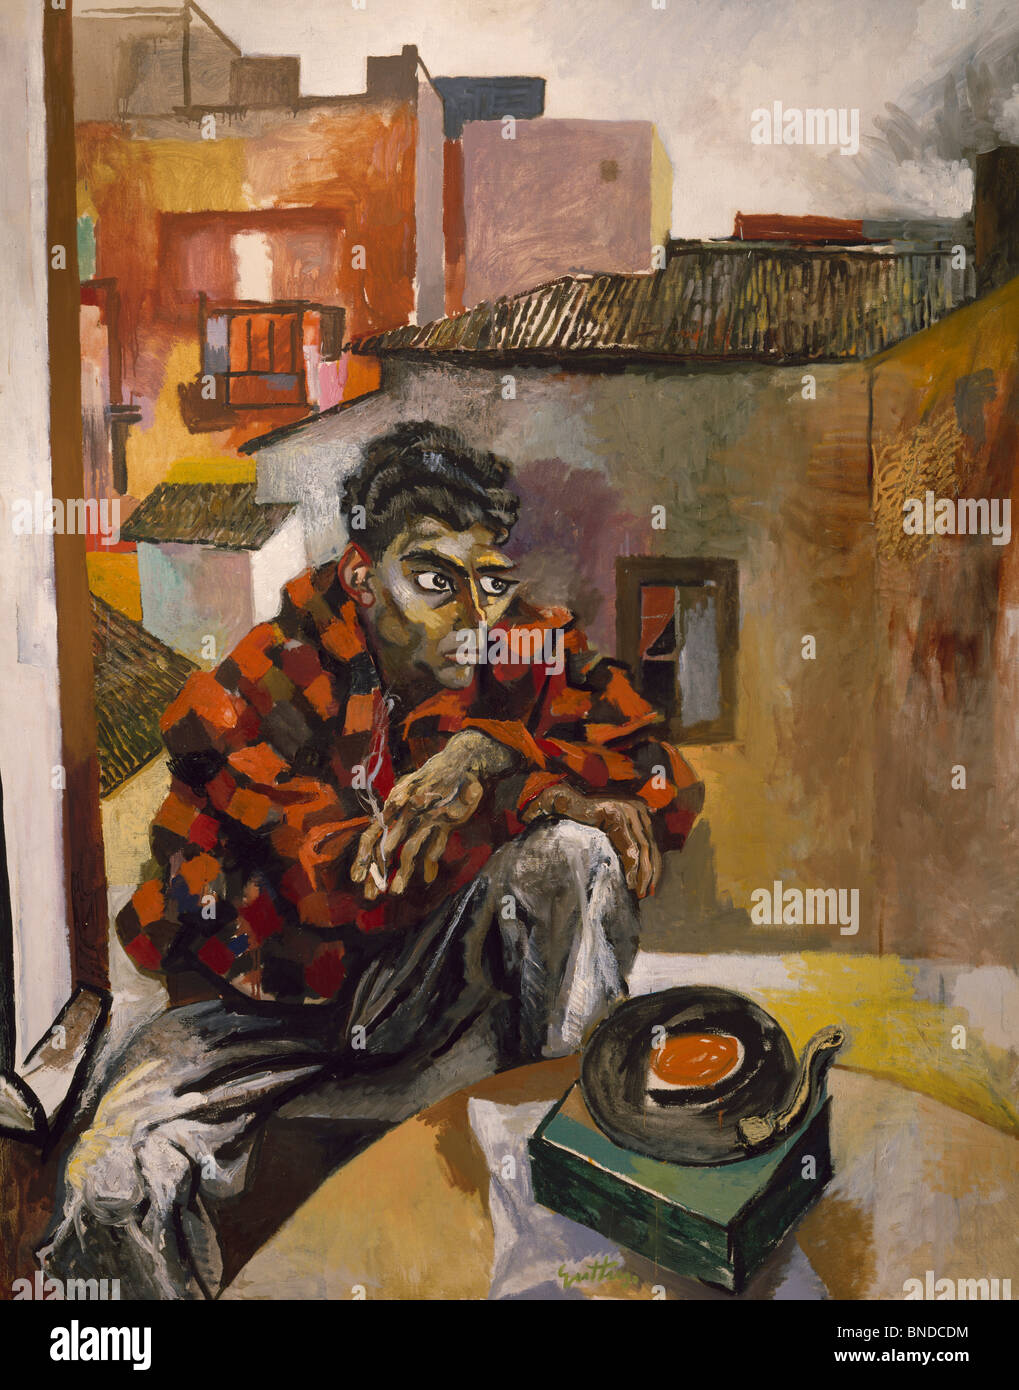 Russia Moscow Pushkin Museum Of Fine Arts Calabrian Worker's Roman Sunday (Rocco With a Gramophone) Renato Guttuso oil painting Stock Photo